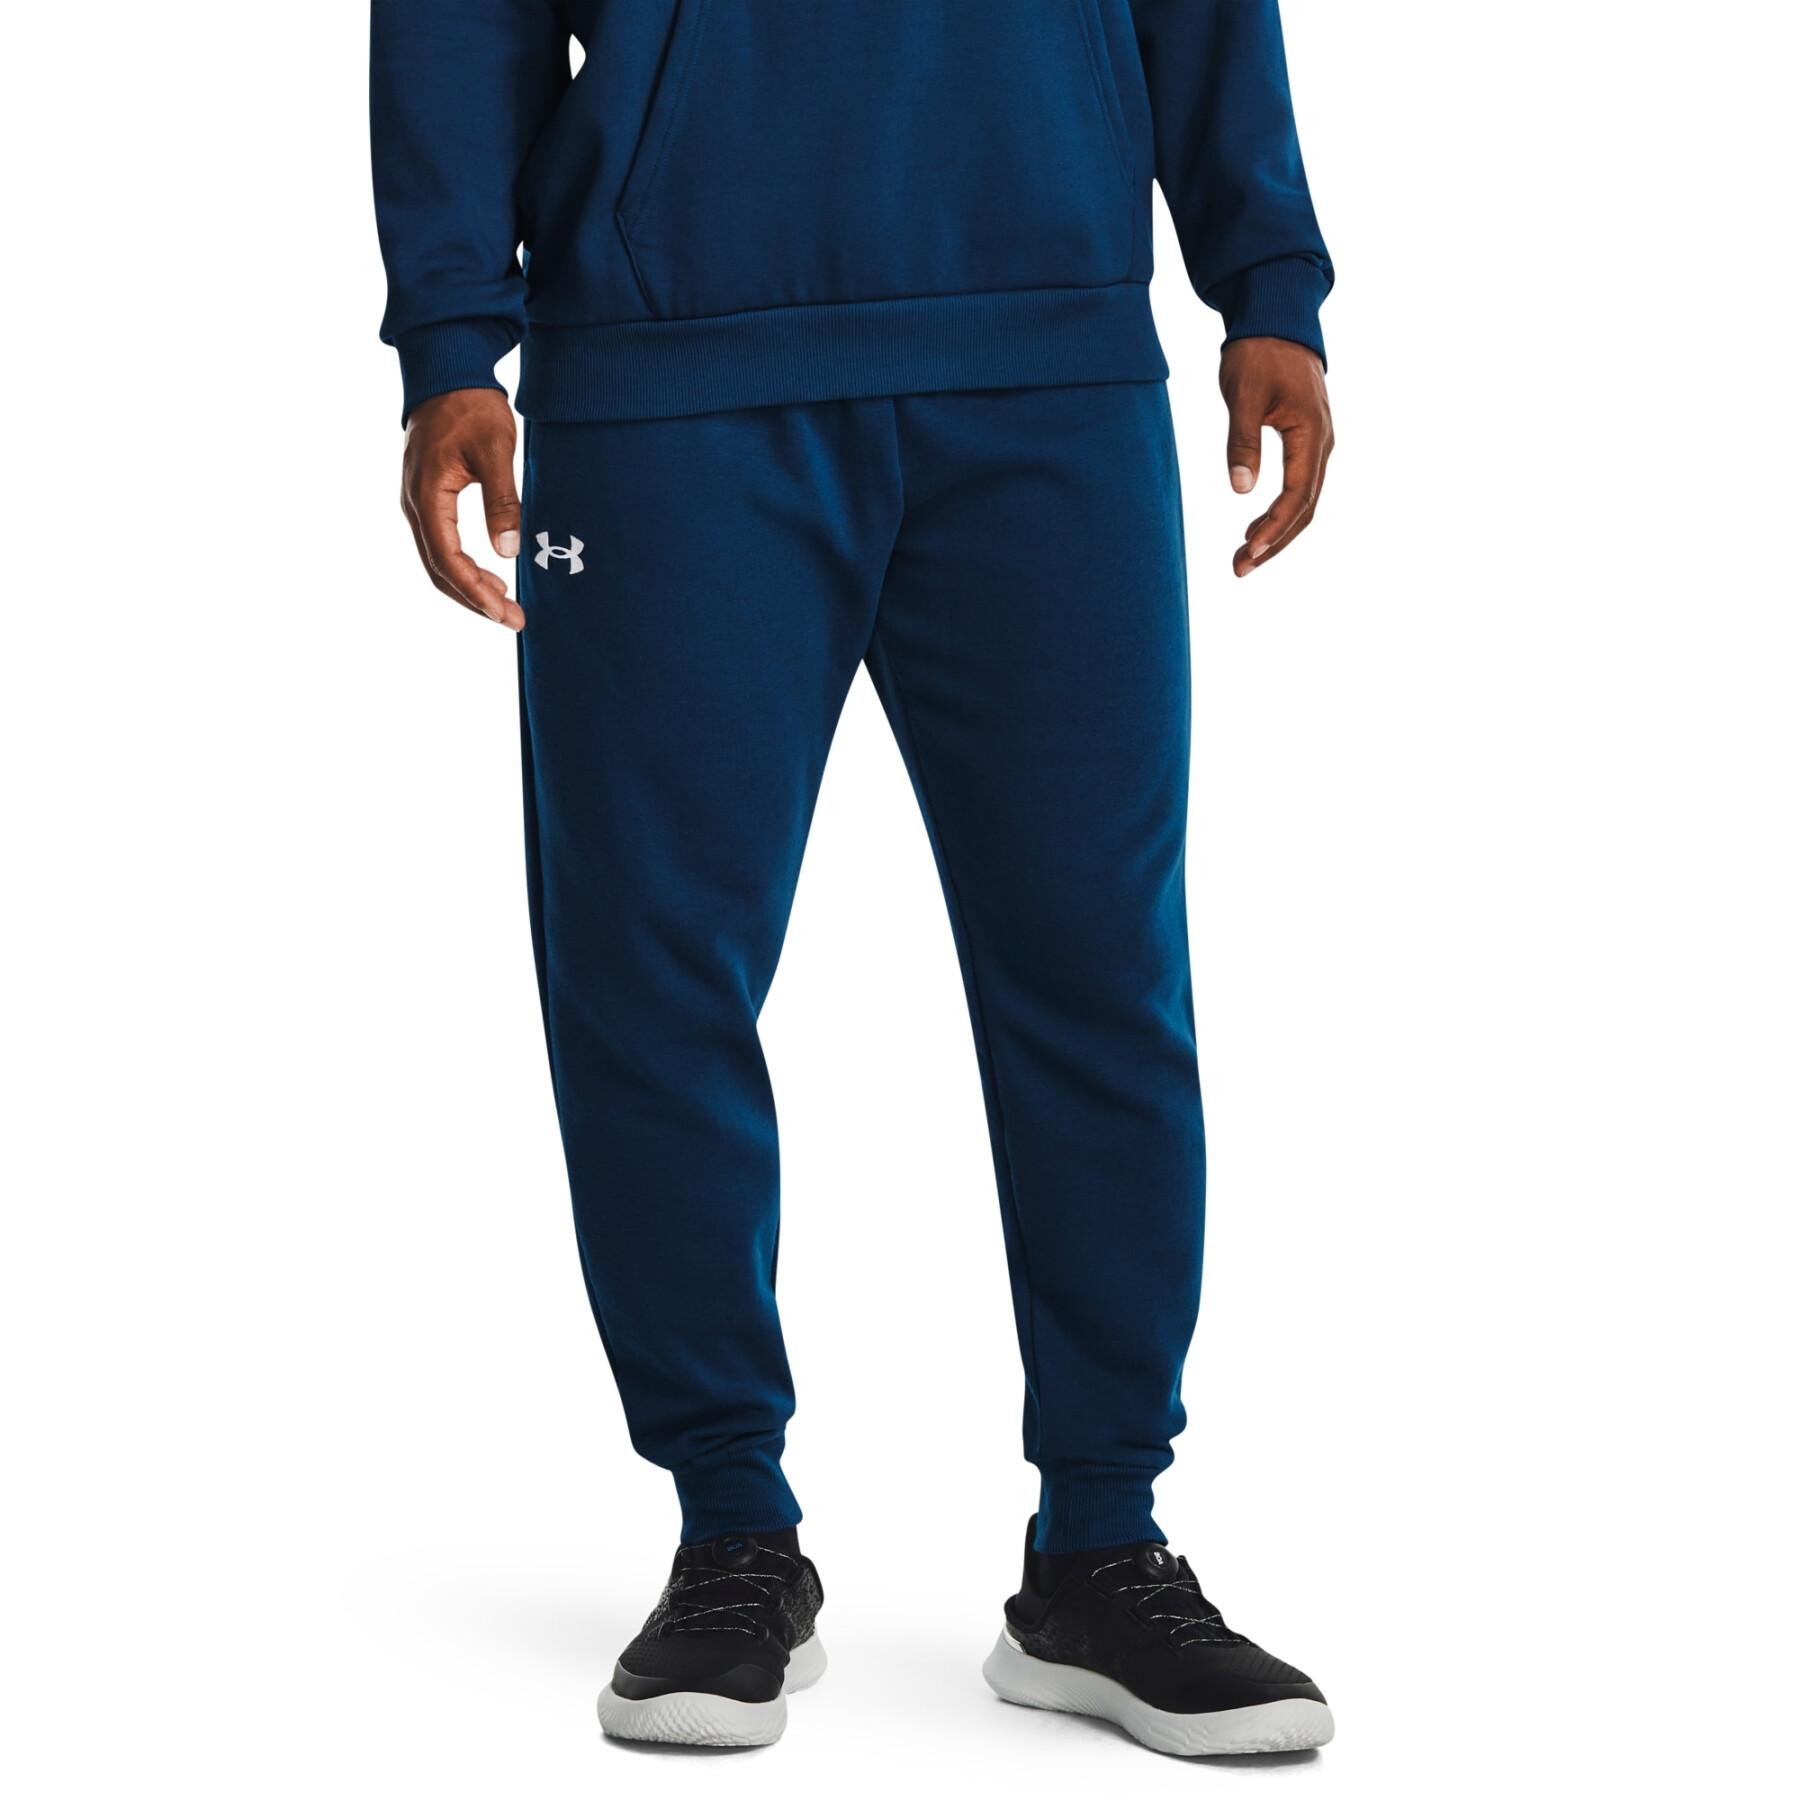 Jogging Under Fleece Mens / Armour Jogging - - Pants Rival Stockings The - suits Clothing